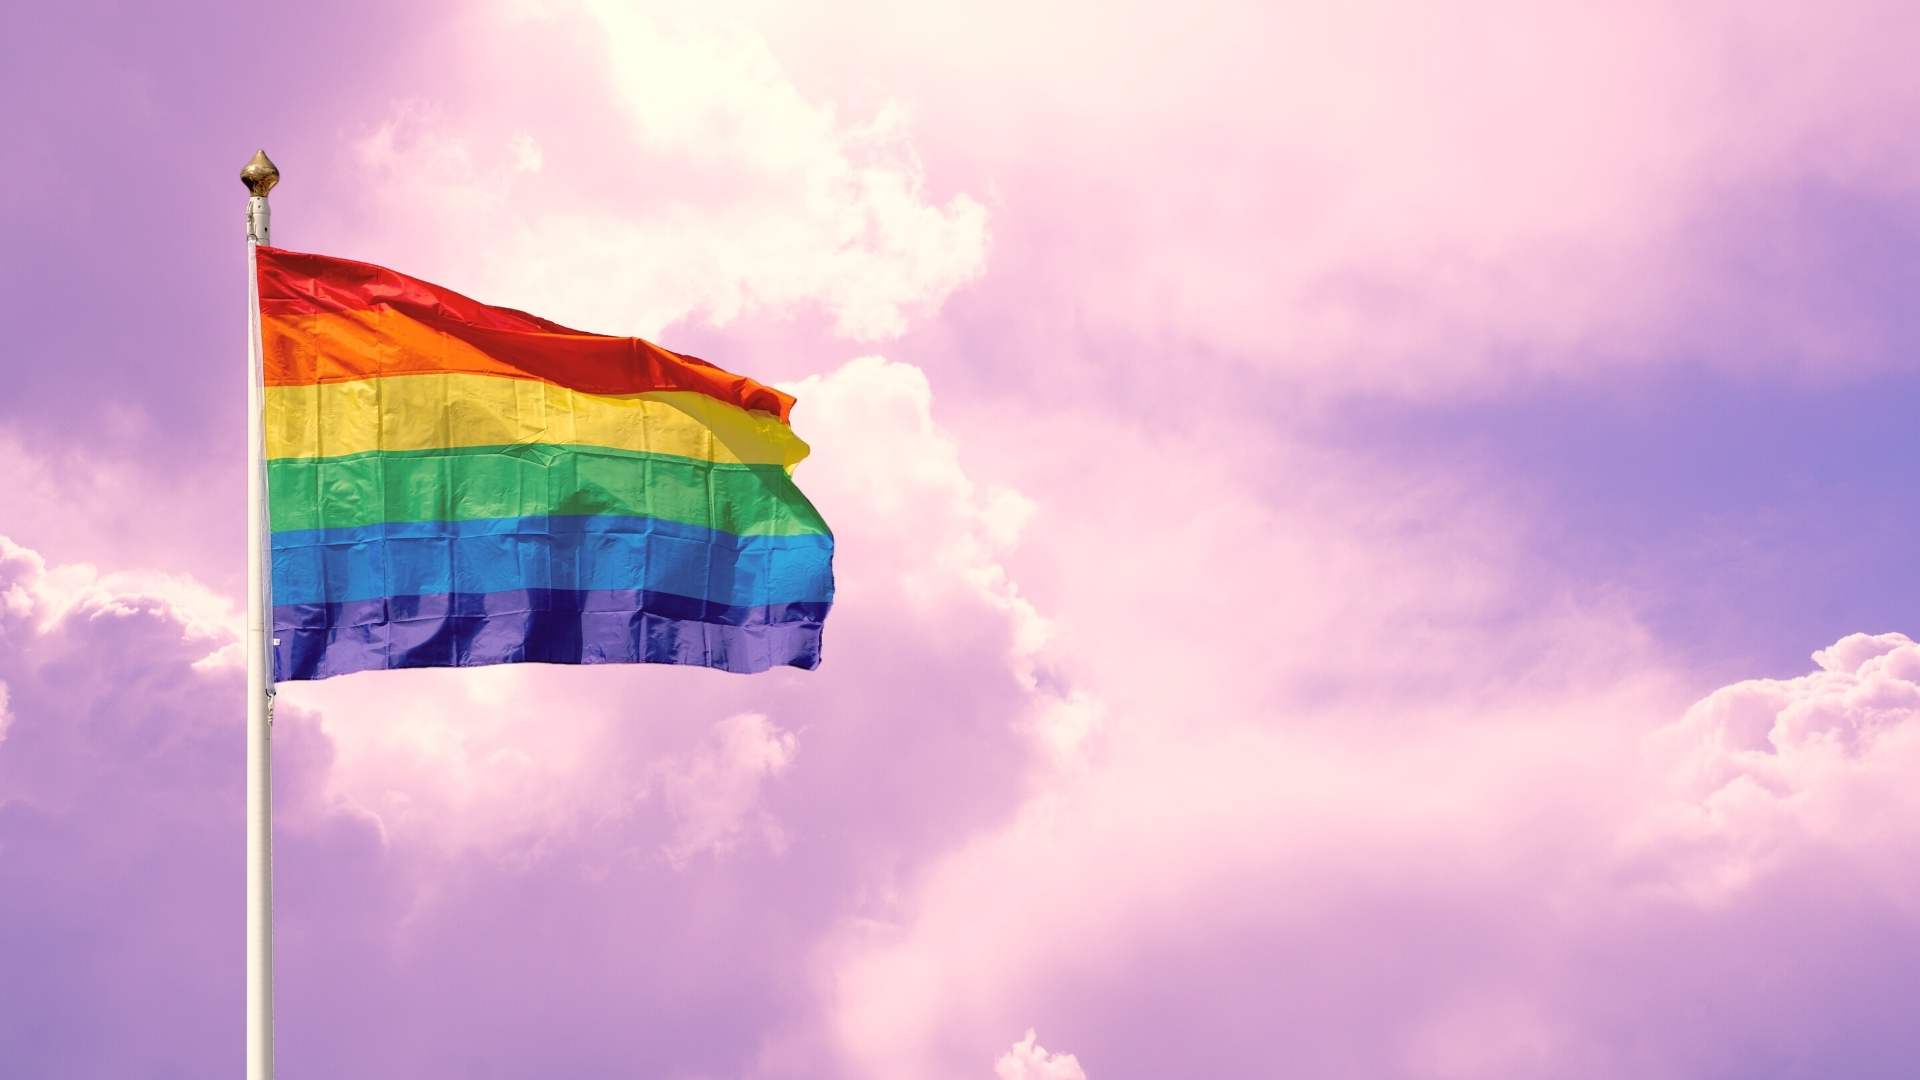 10 LGBTQ+ Organizations to Support During Pride (and all year long)